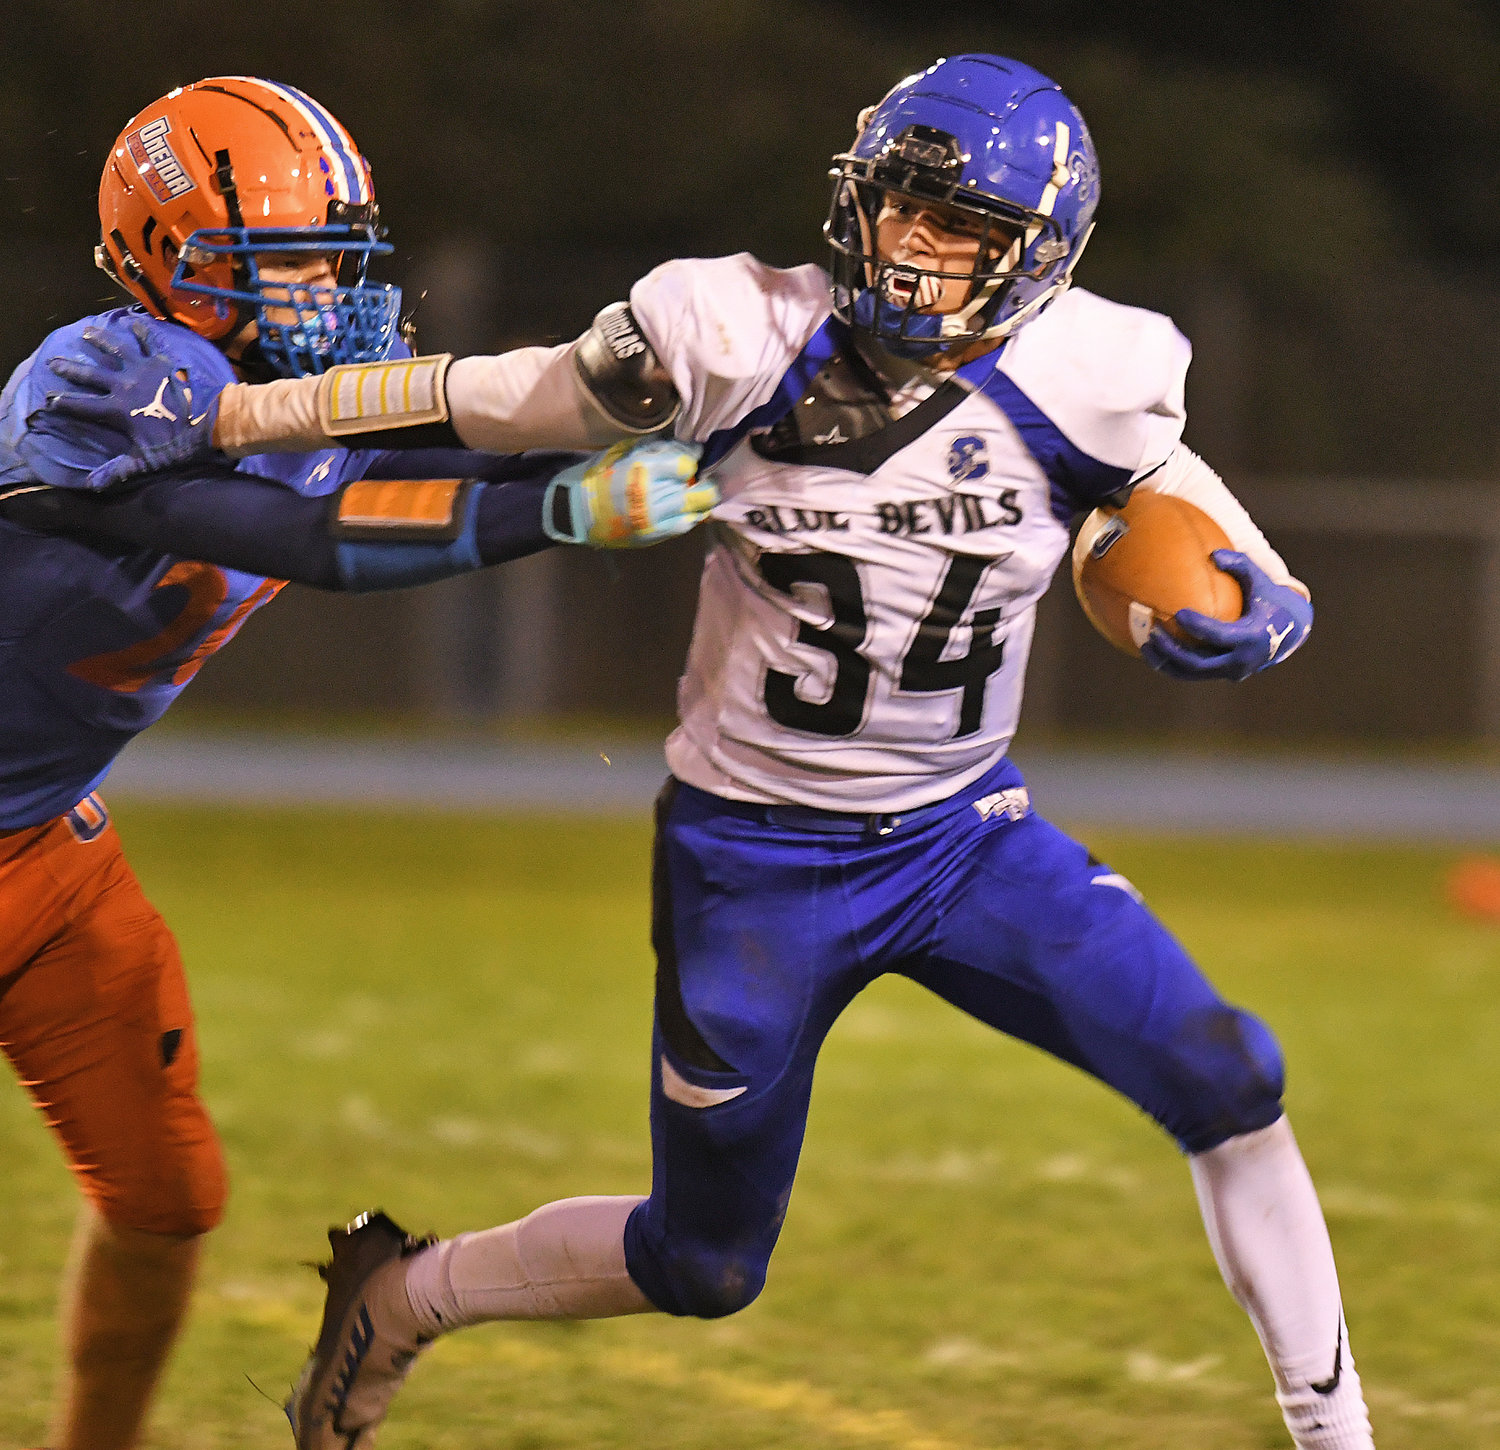 Camden's Noah Morse tries to elude Oneida's Austin DeGroat during a run in the first half Friday night in Oneida. Morse had 97 yards on 14 carries. Camden finished with 241 yards rushing led mostly by Morse, Trey Kimball and Connor Dean.